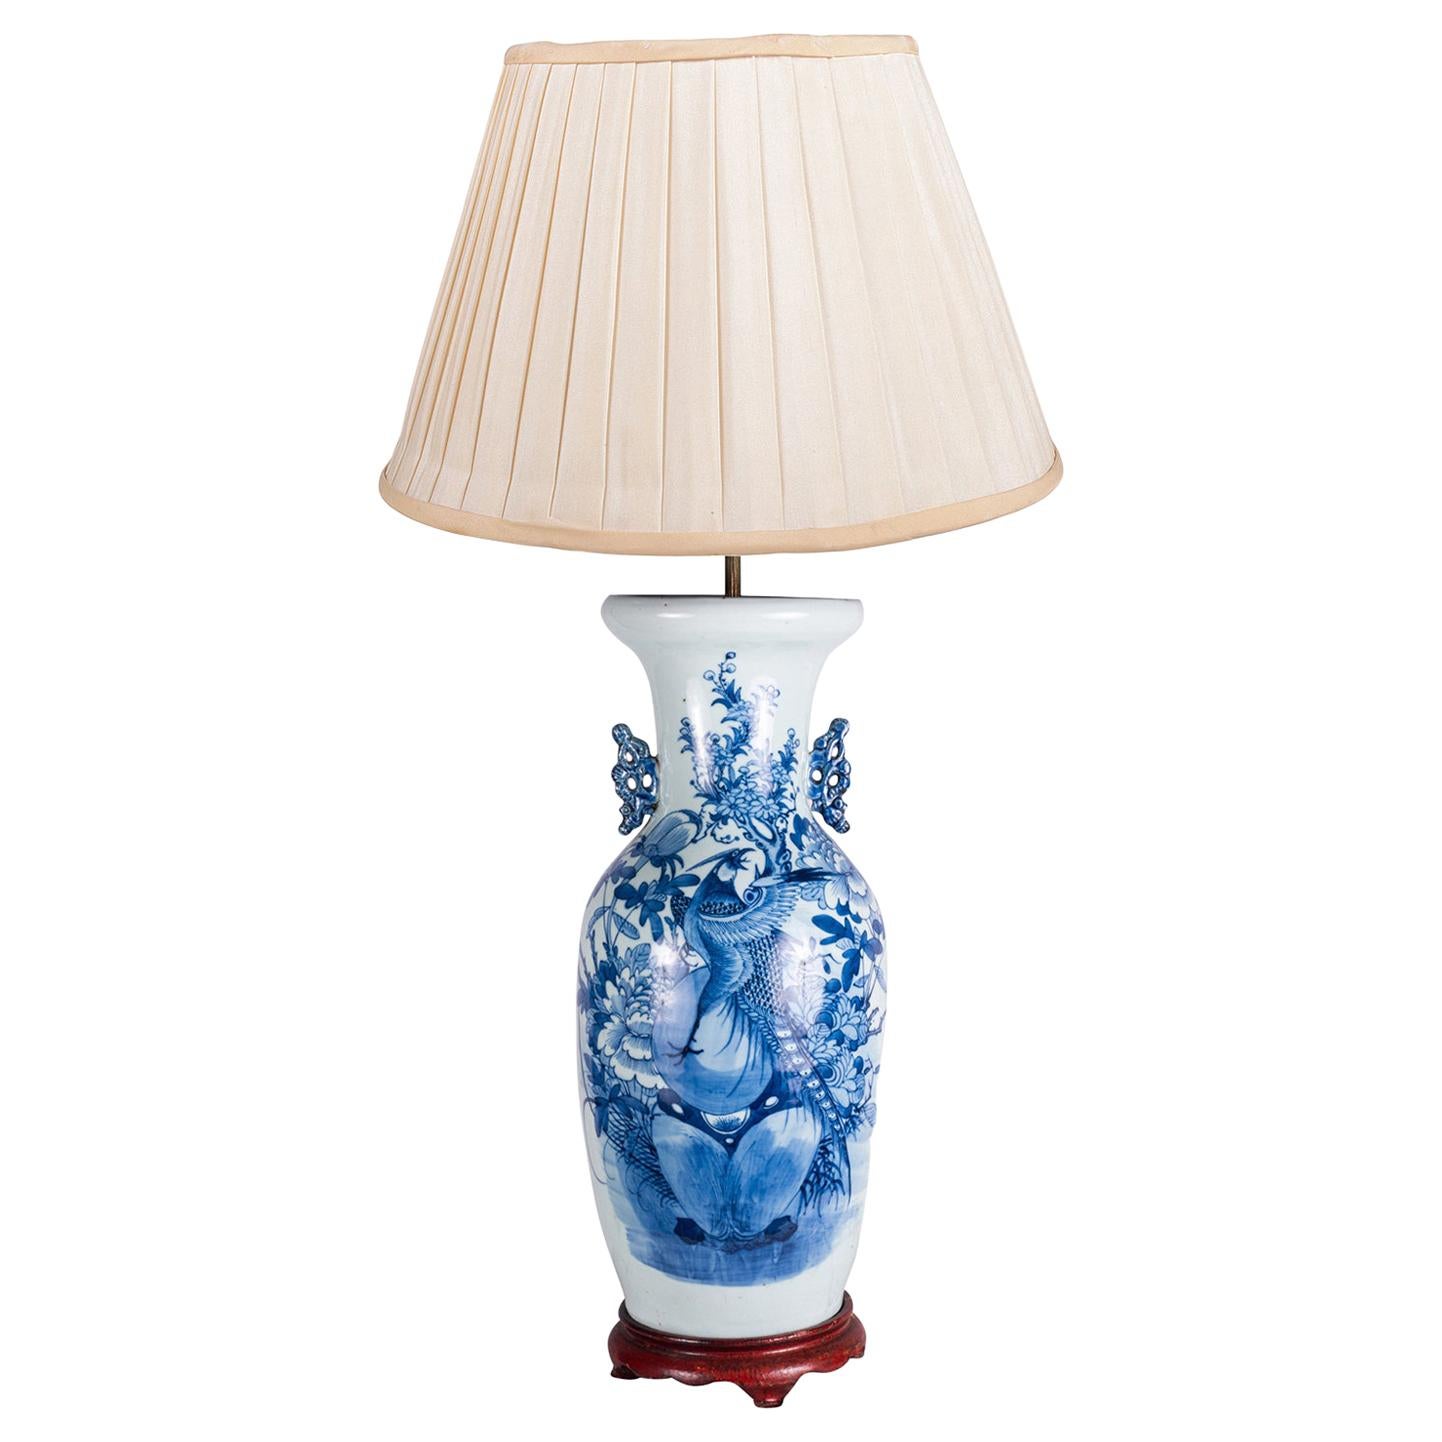 19th Century Chinese Blue and White Vase or Lamp